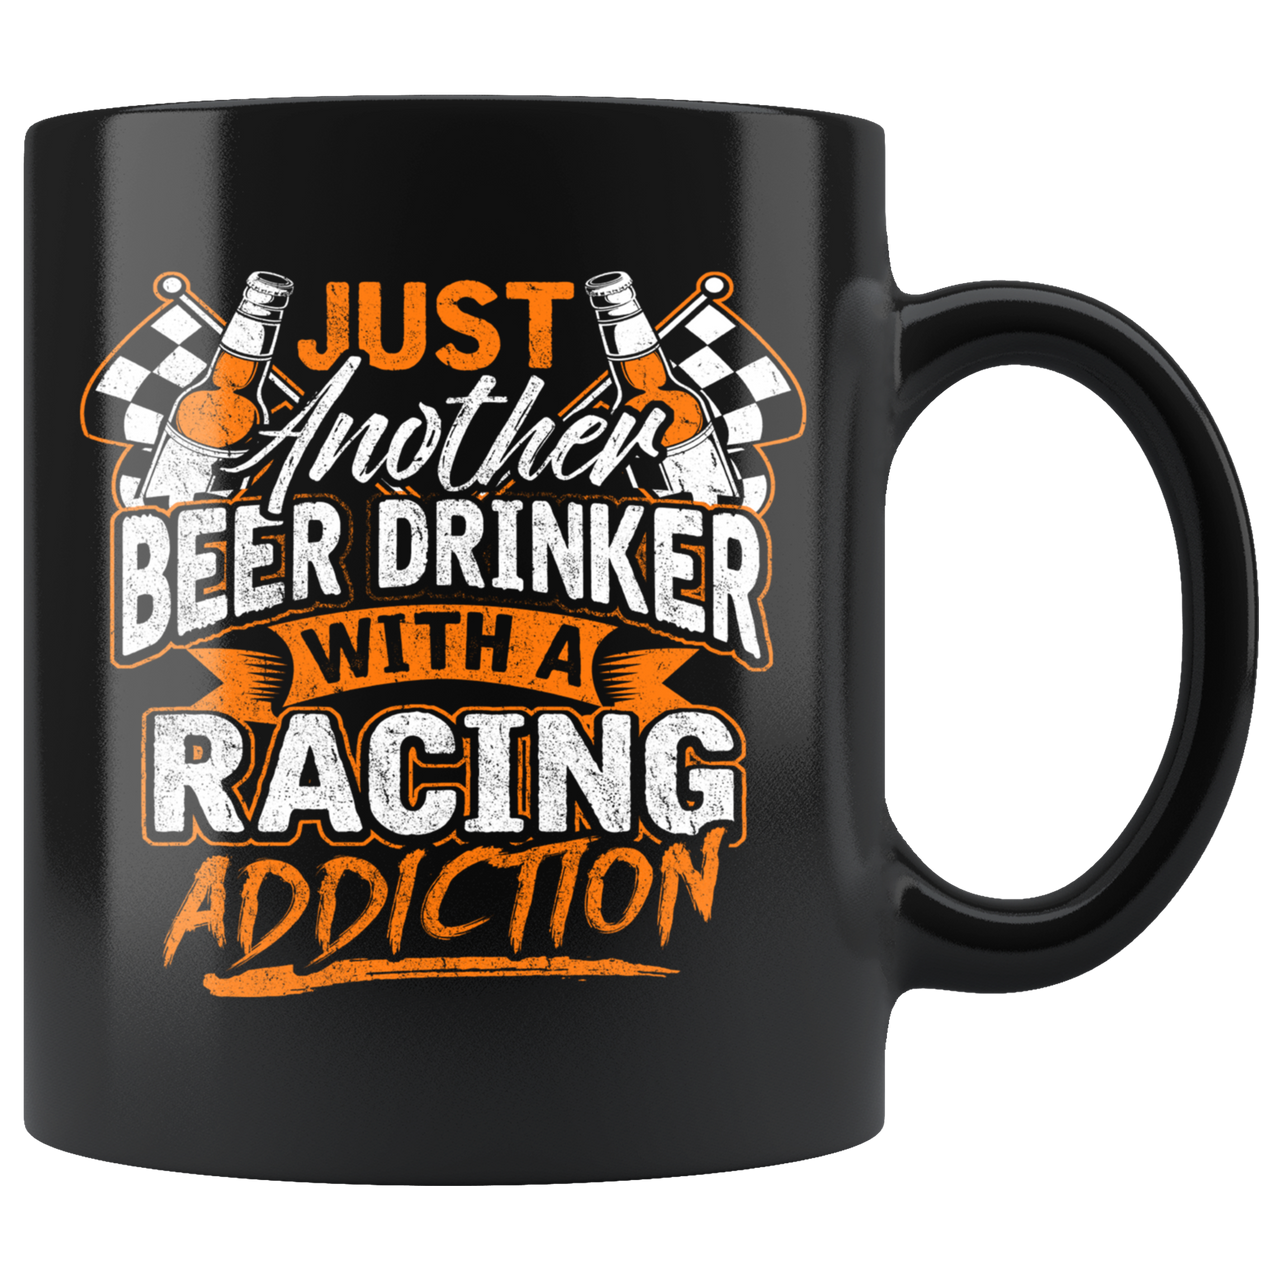 Just Another Beer Drinker With Racing Addiction Mug!